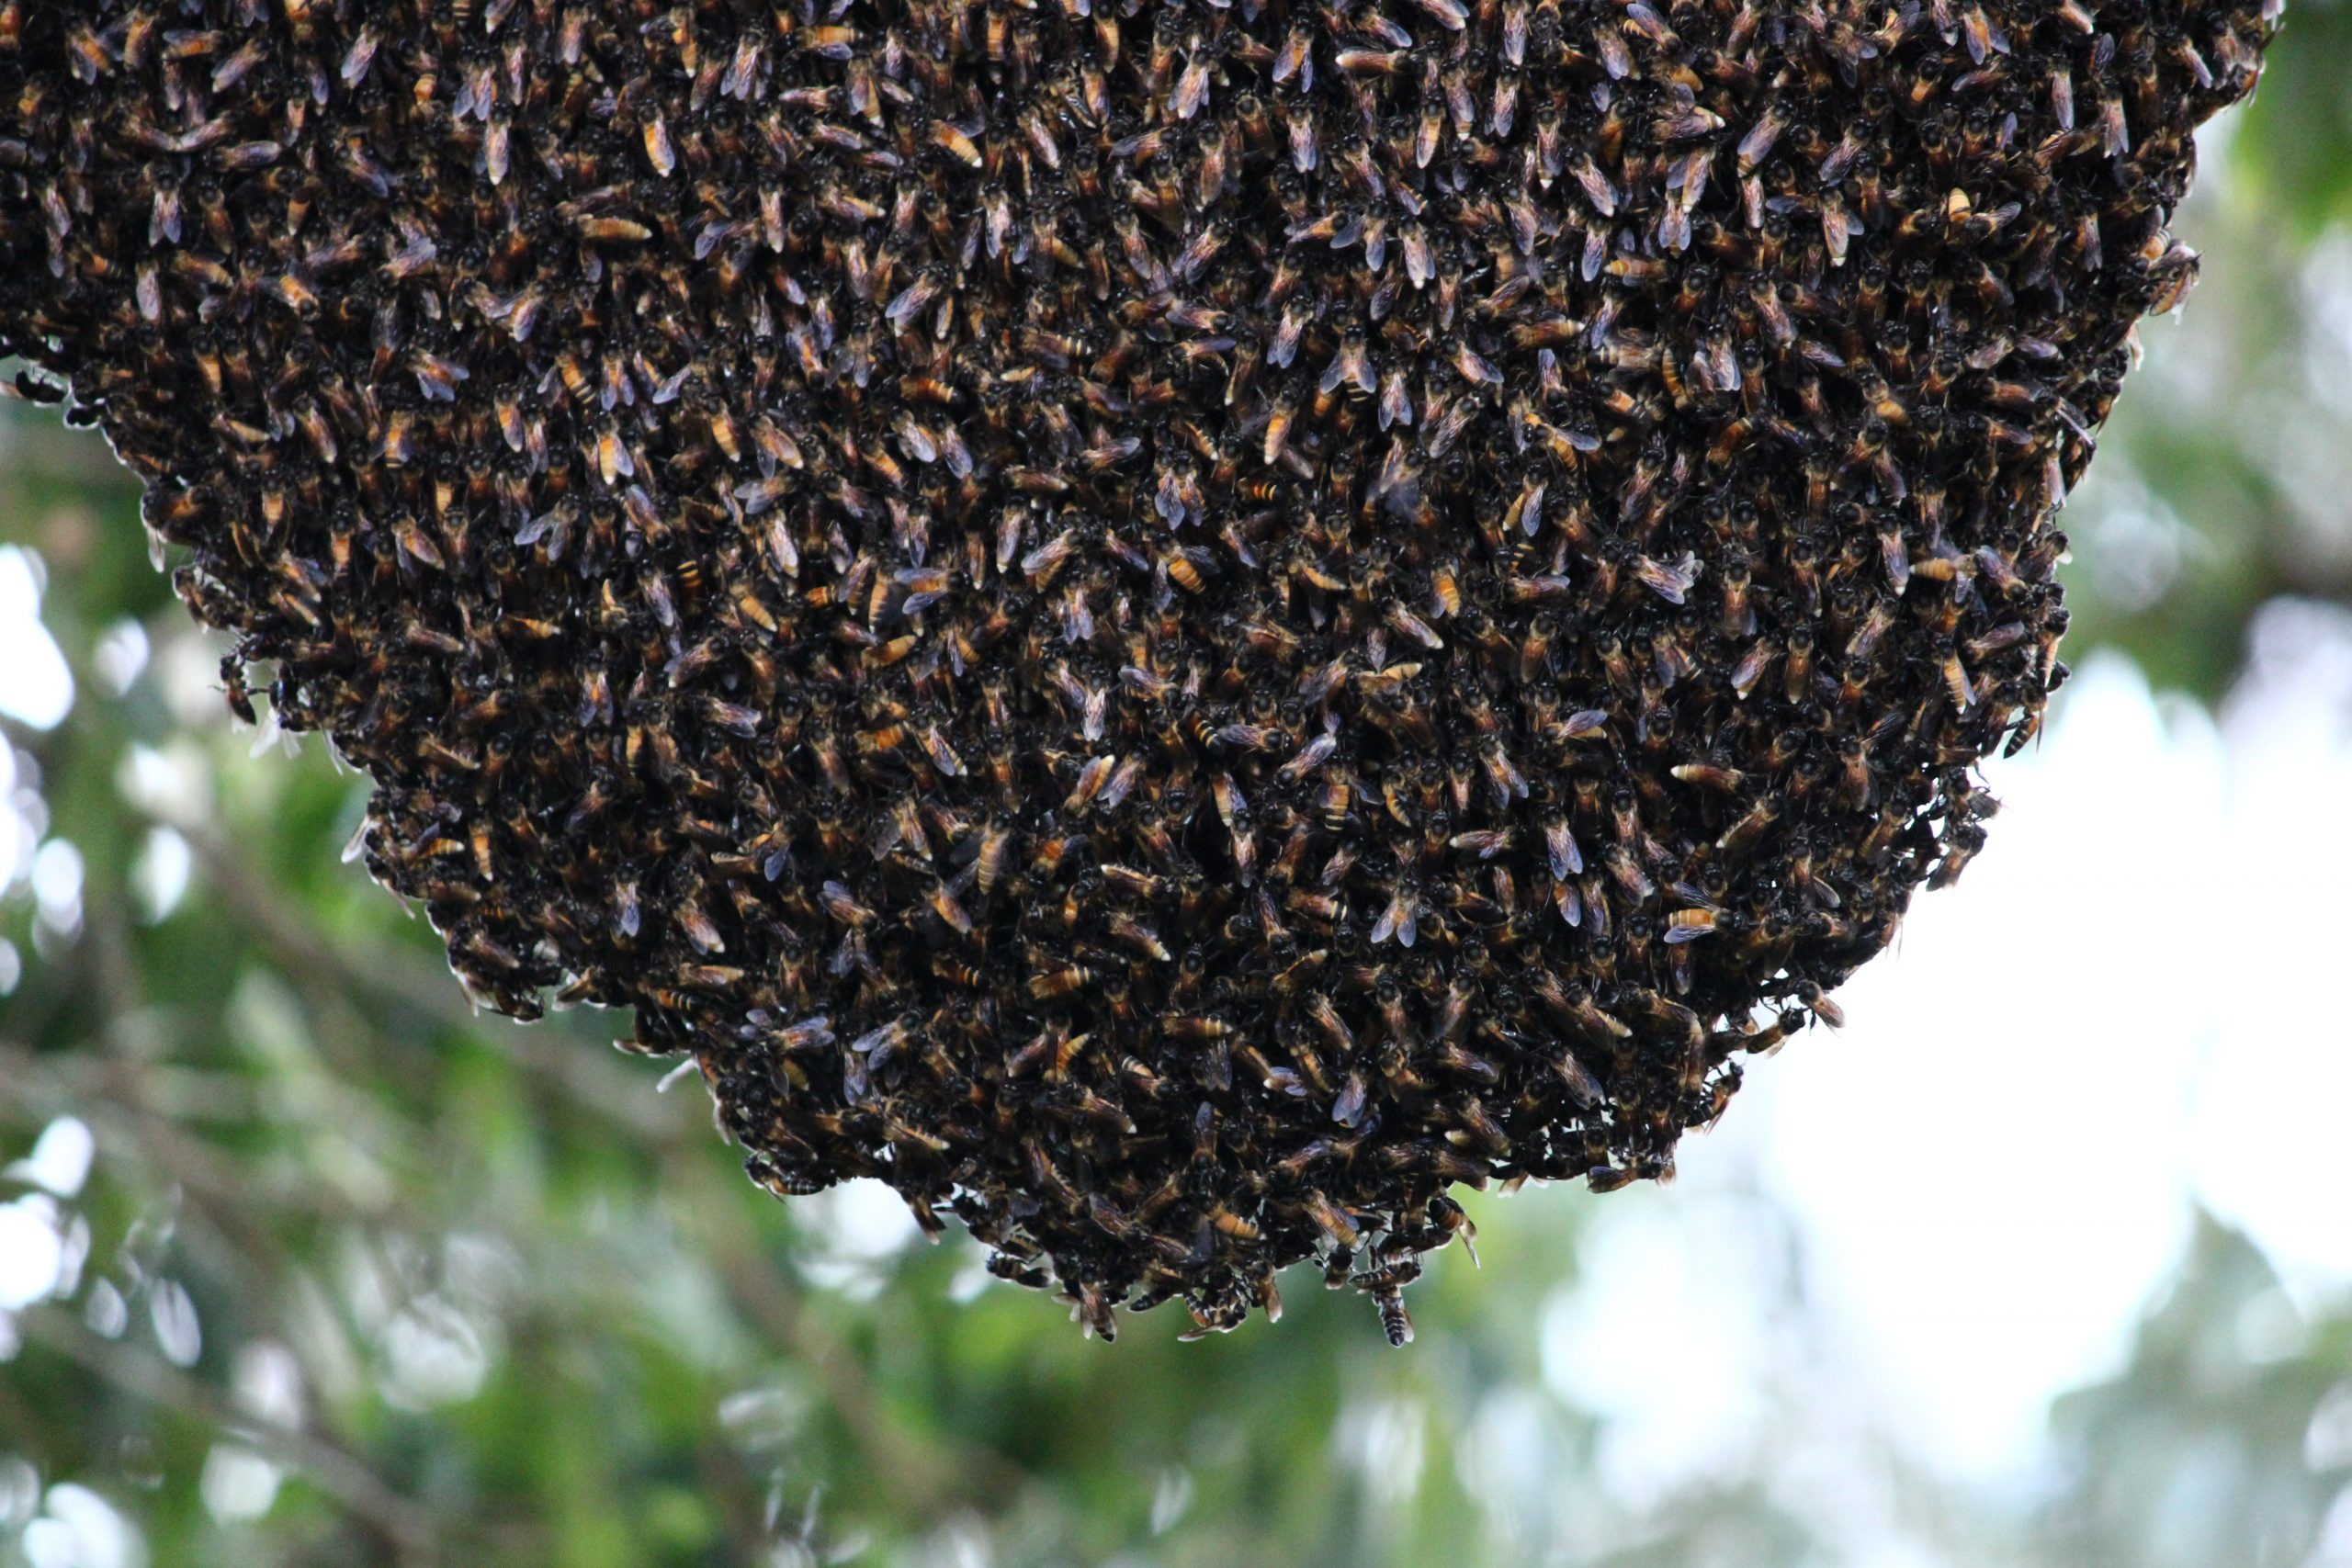 A swarm of bees